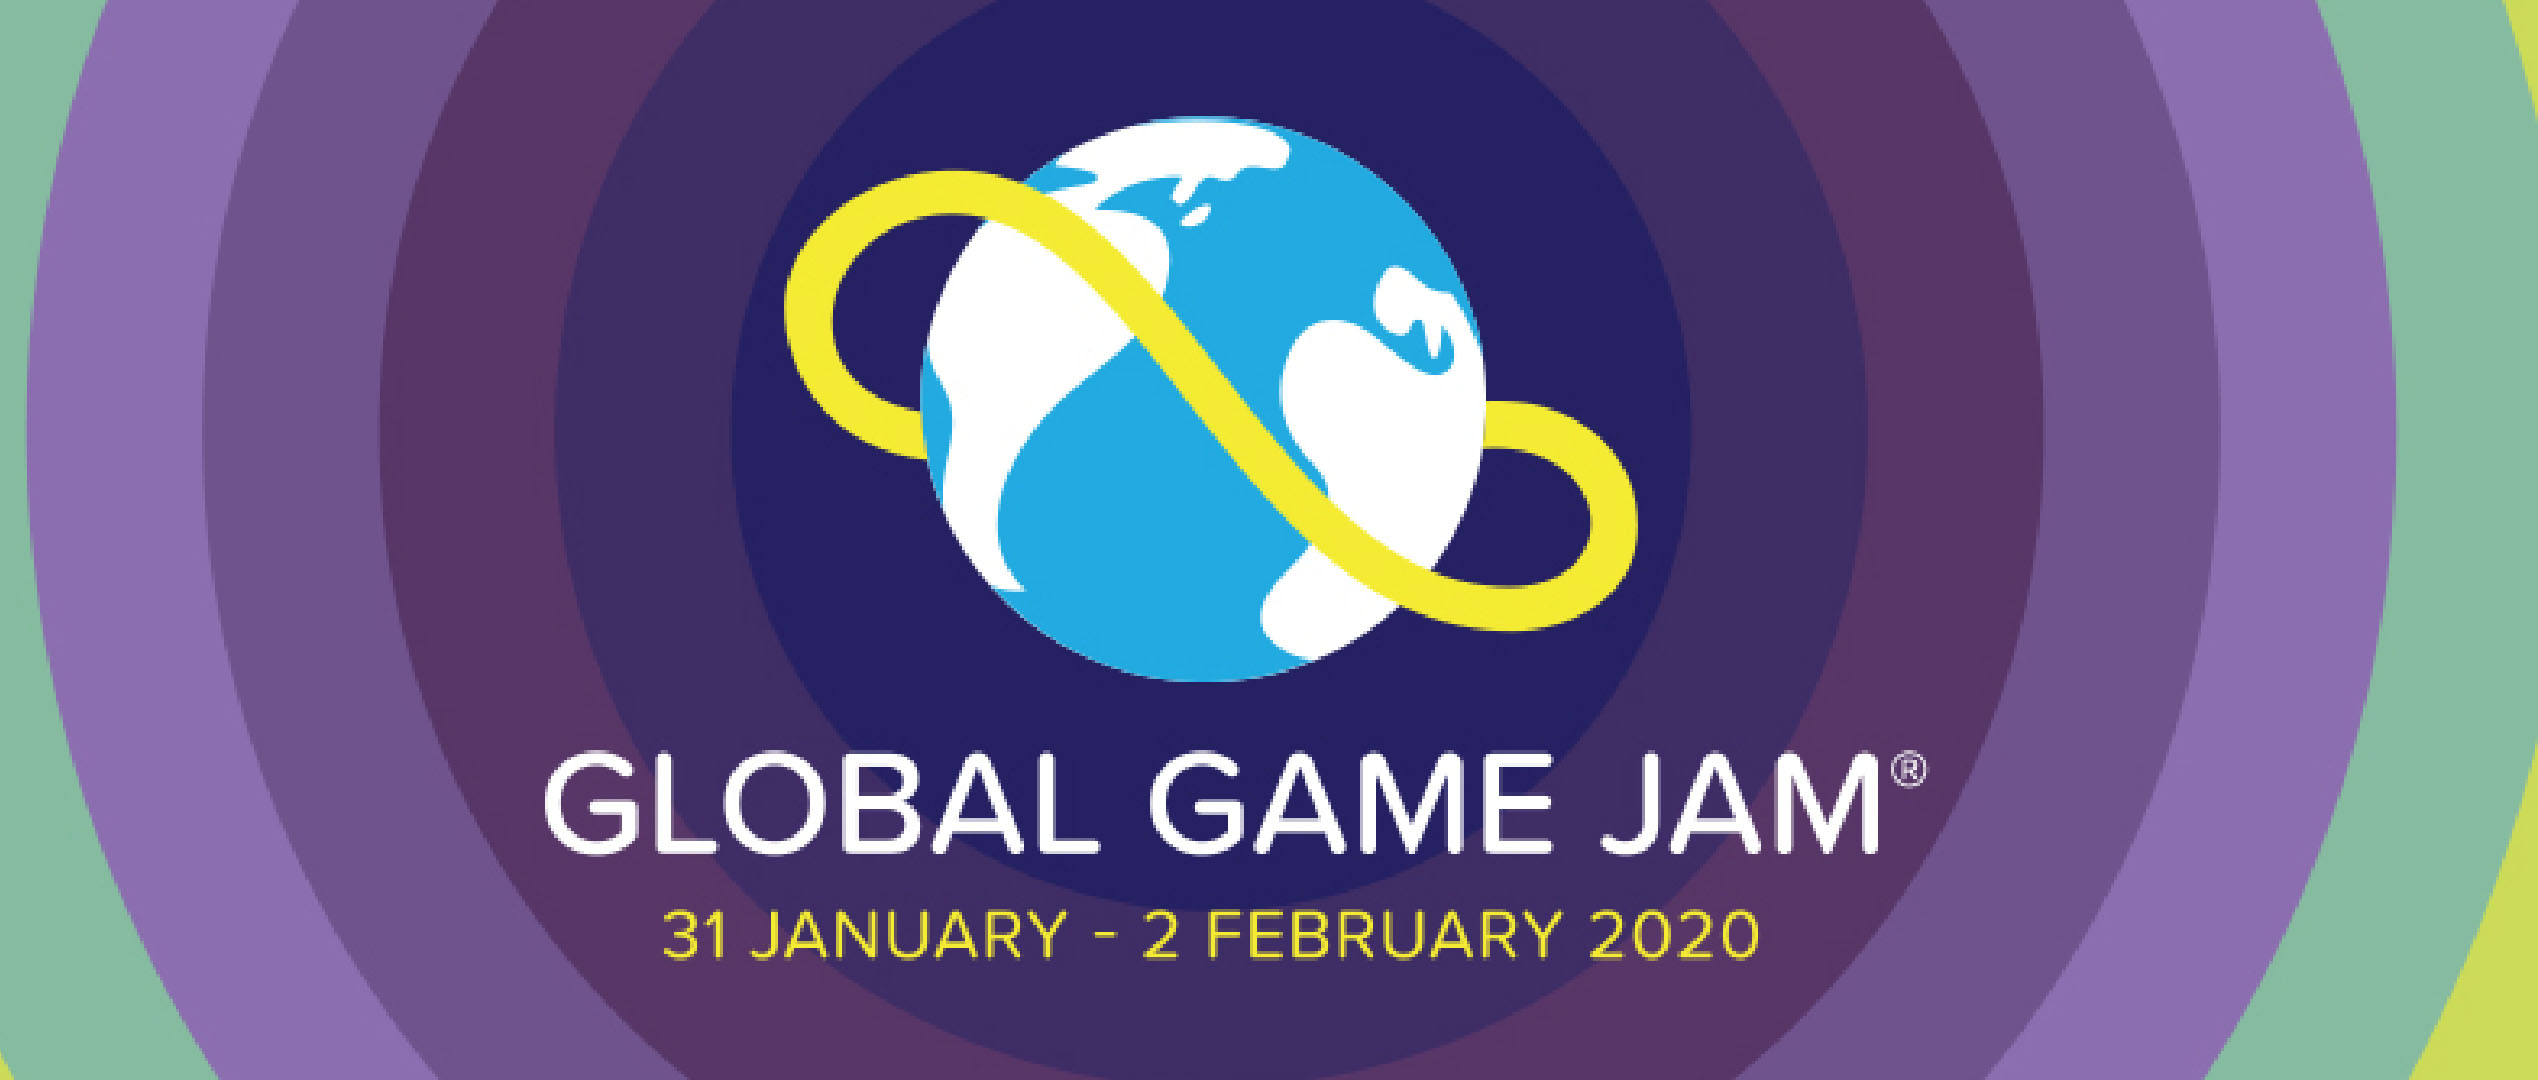 See you at the Global Game Jam 2020!